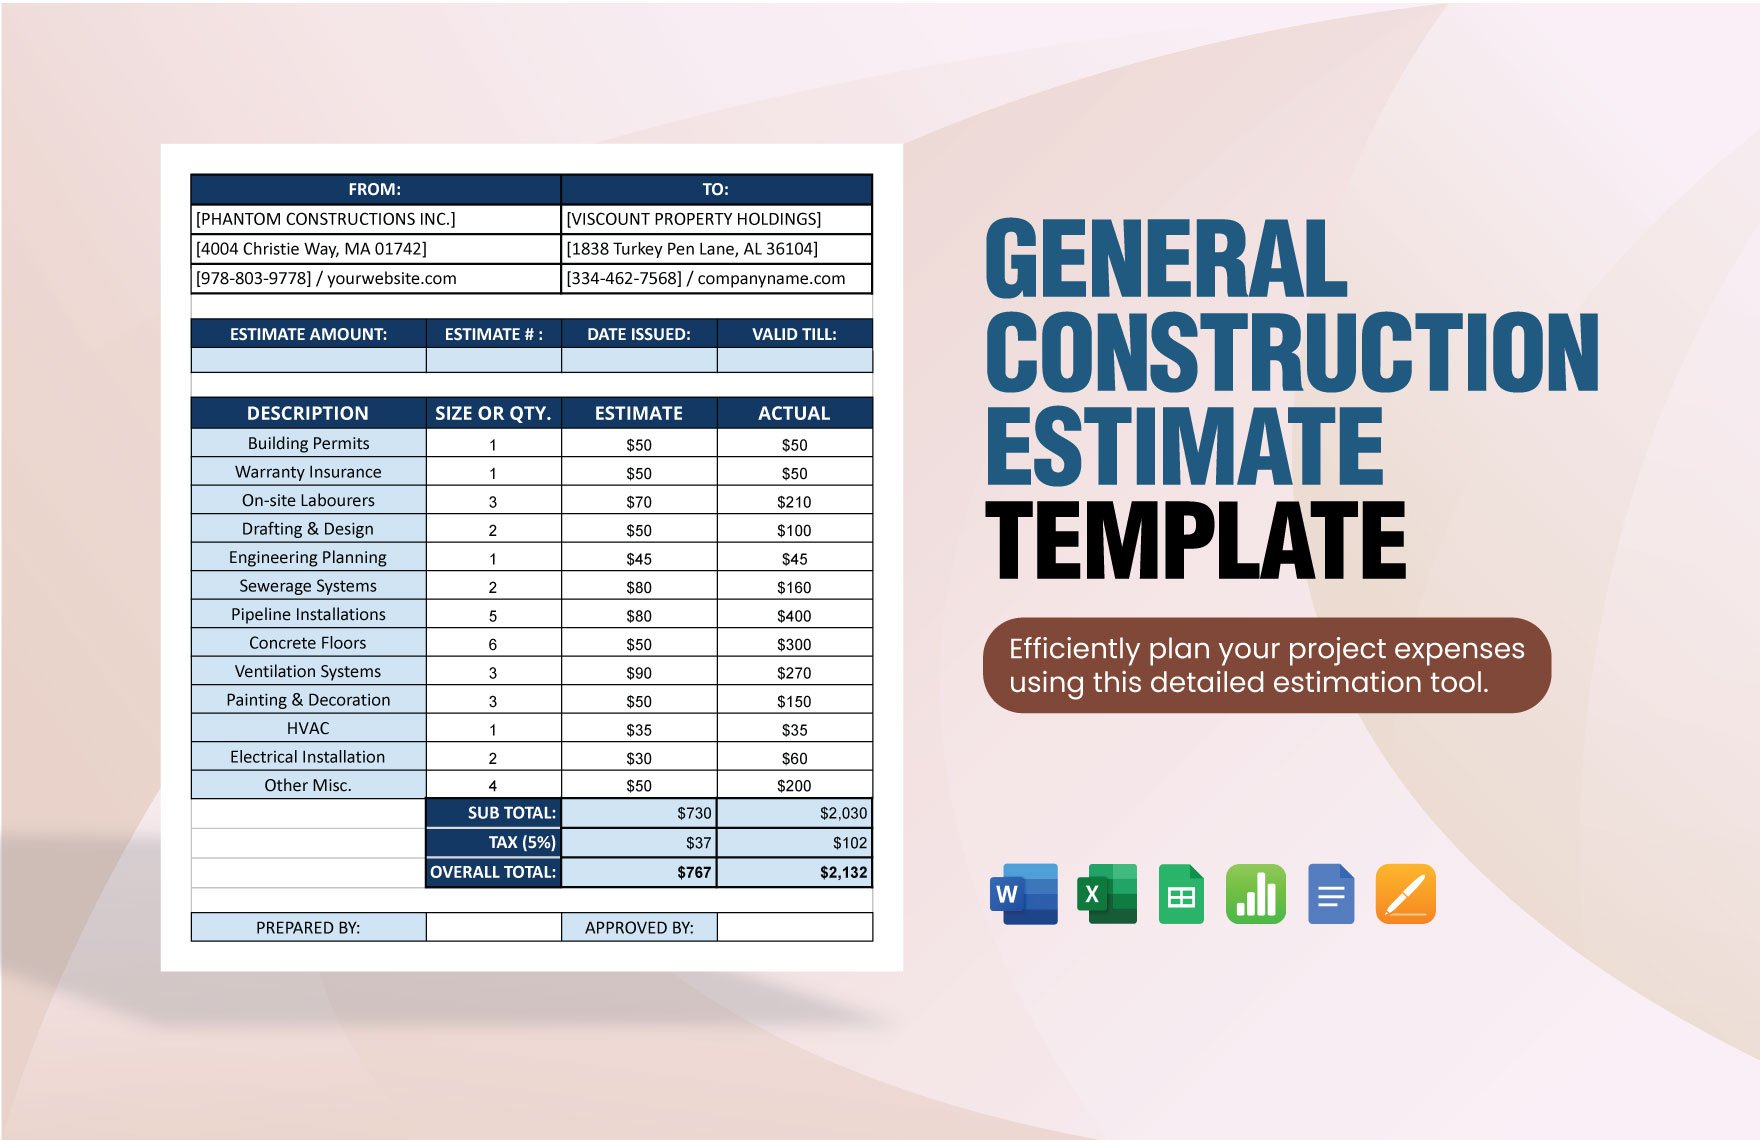 General Construction Estimate Template in Word, Google Docs, Excel, Google Sheets, Apple Pages, Apple Numbers